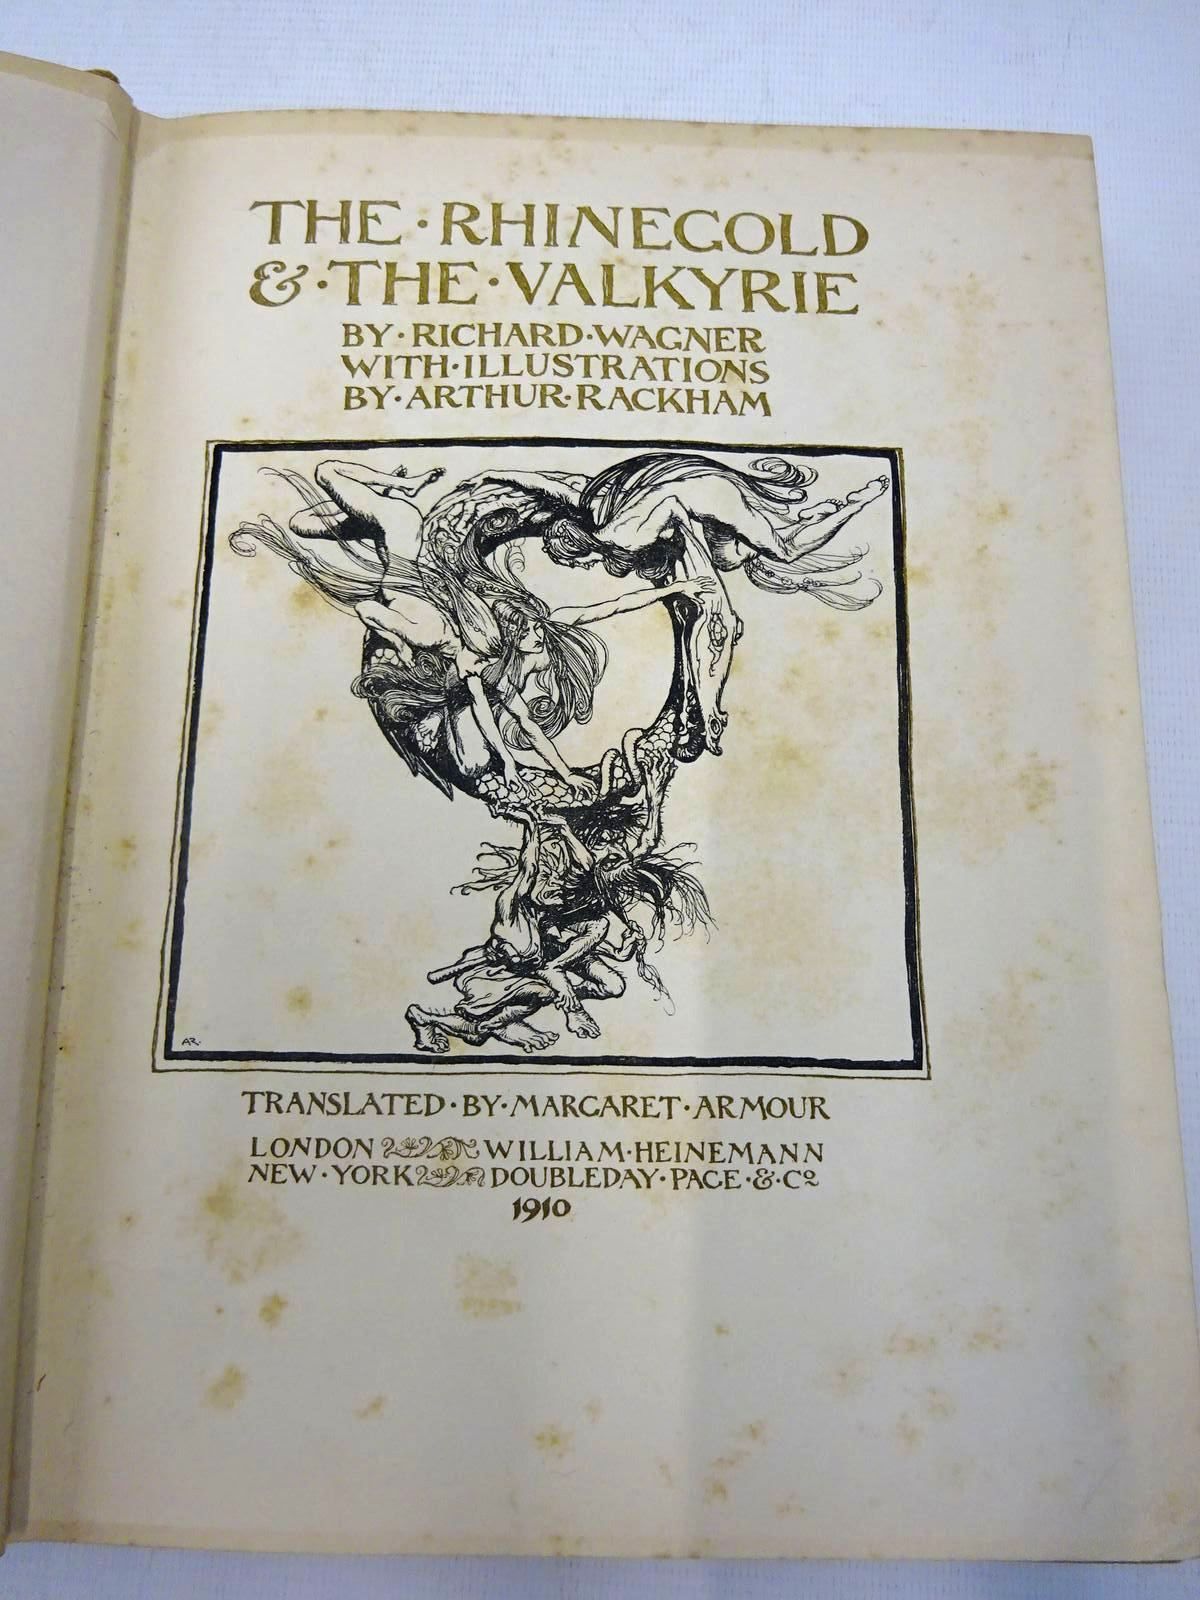 Photo of THE RHINEGOLD & THE VALKYRIE written by Wagner, Richard
Armour, Margaret illustrated by Rackham, Arthur published by William Heinemann (STOCK CODE: 2127691)  for sale by Stella & Rose's Books